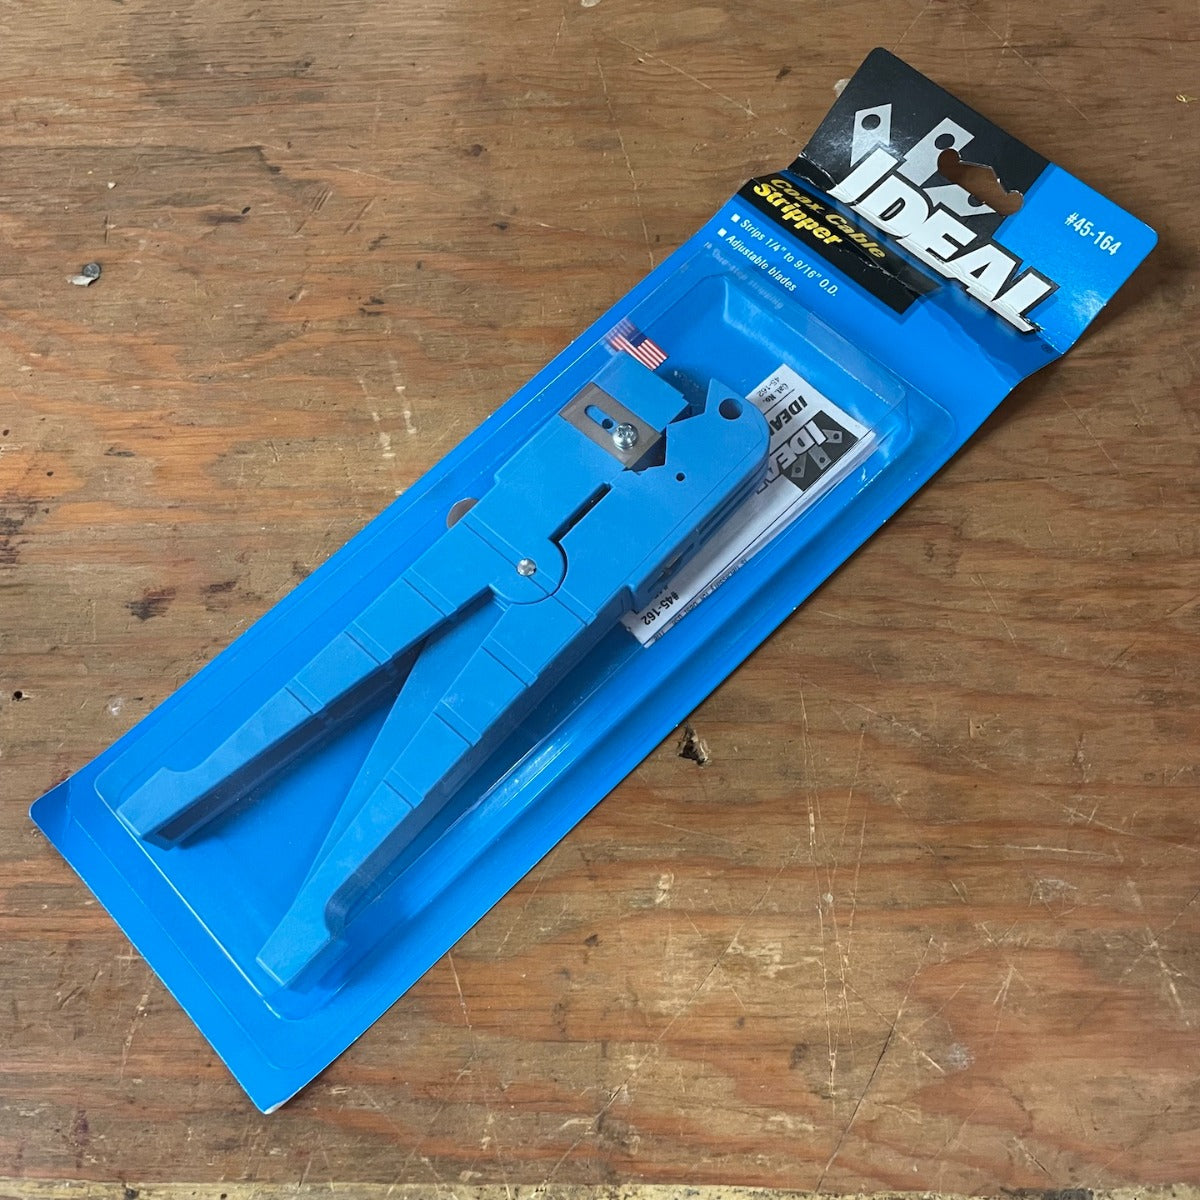 Ideal Coax Cable Stripper (45-164)